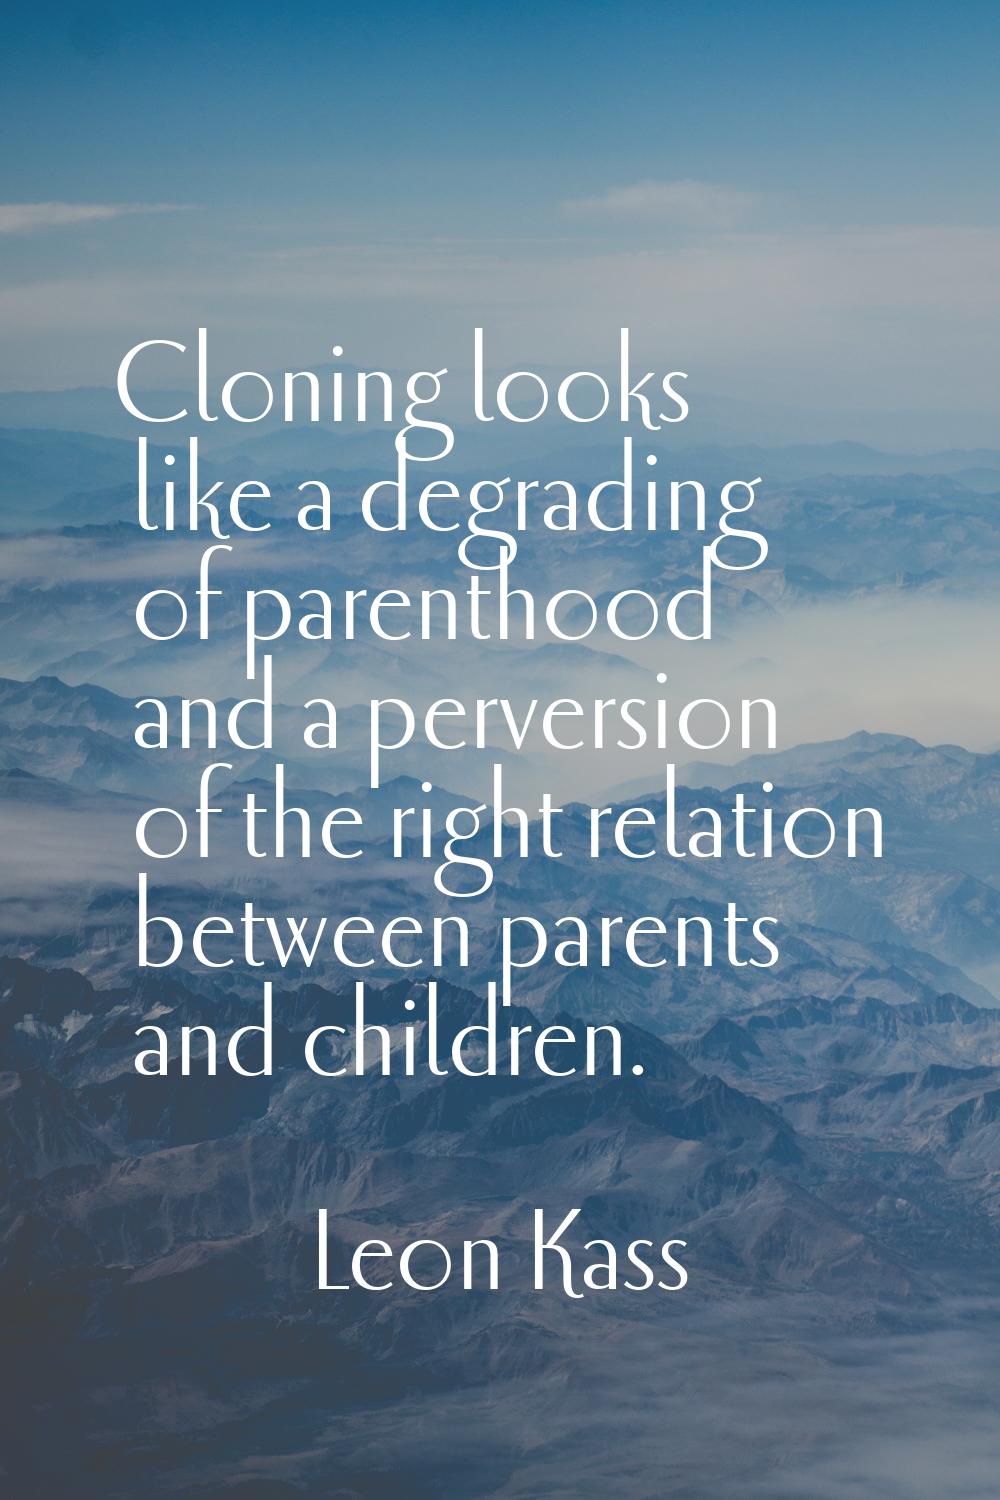 Cloning looks like a degrading of parenthood and a perversion of the right relation between parents